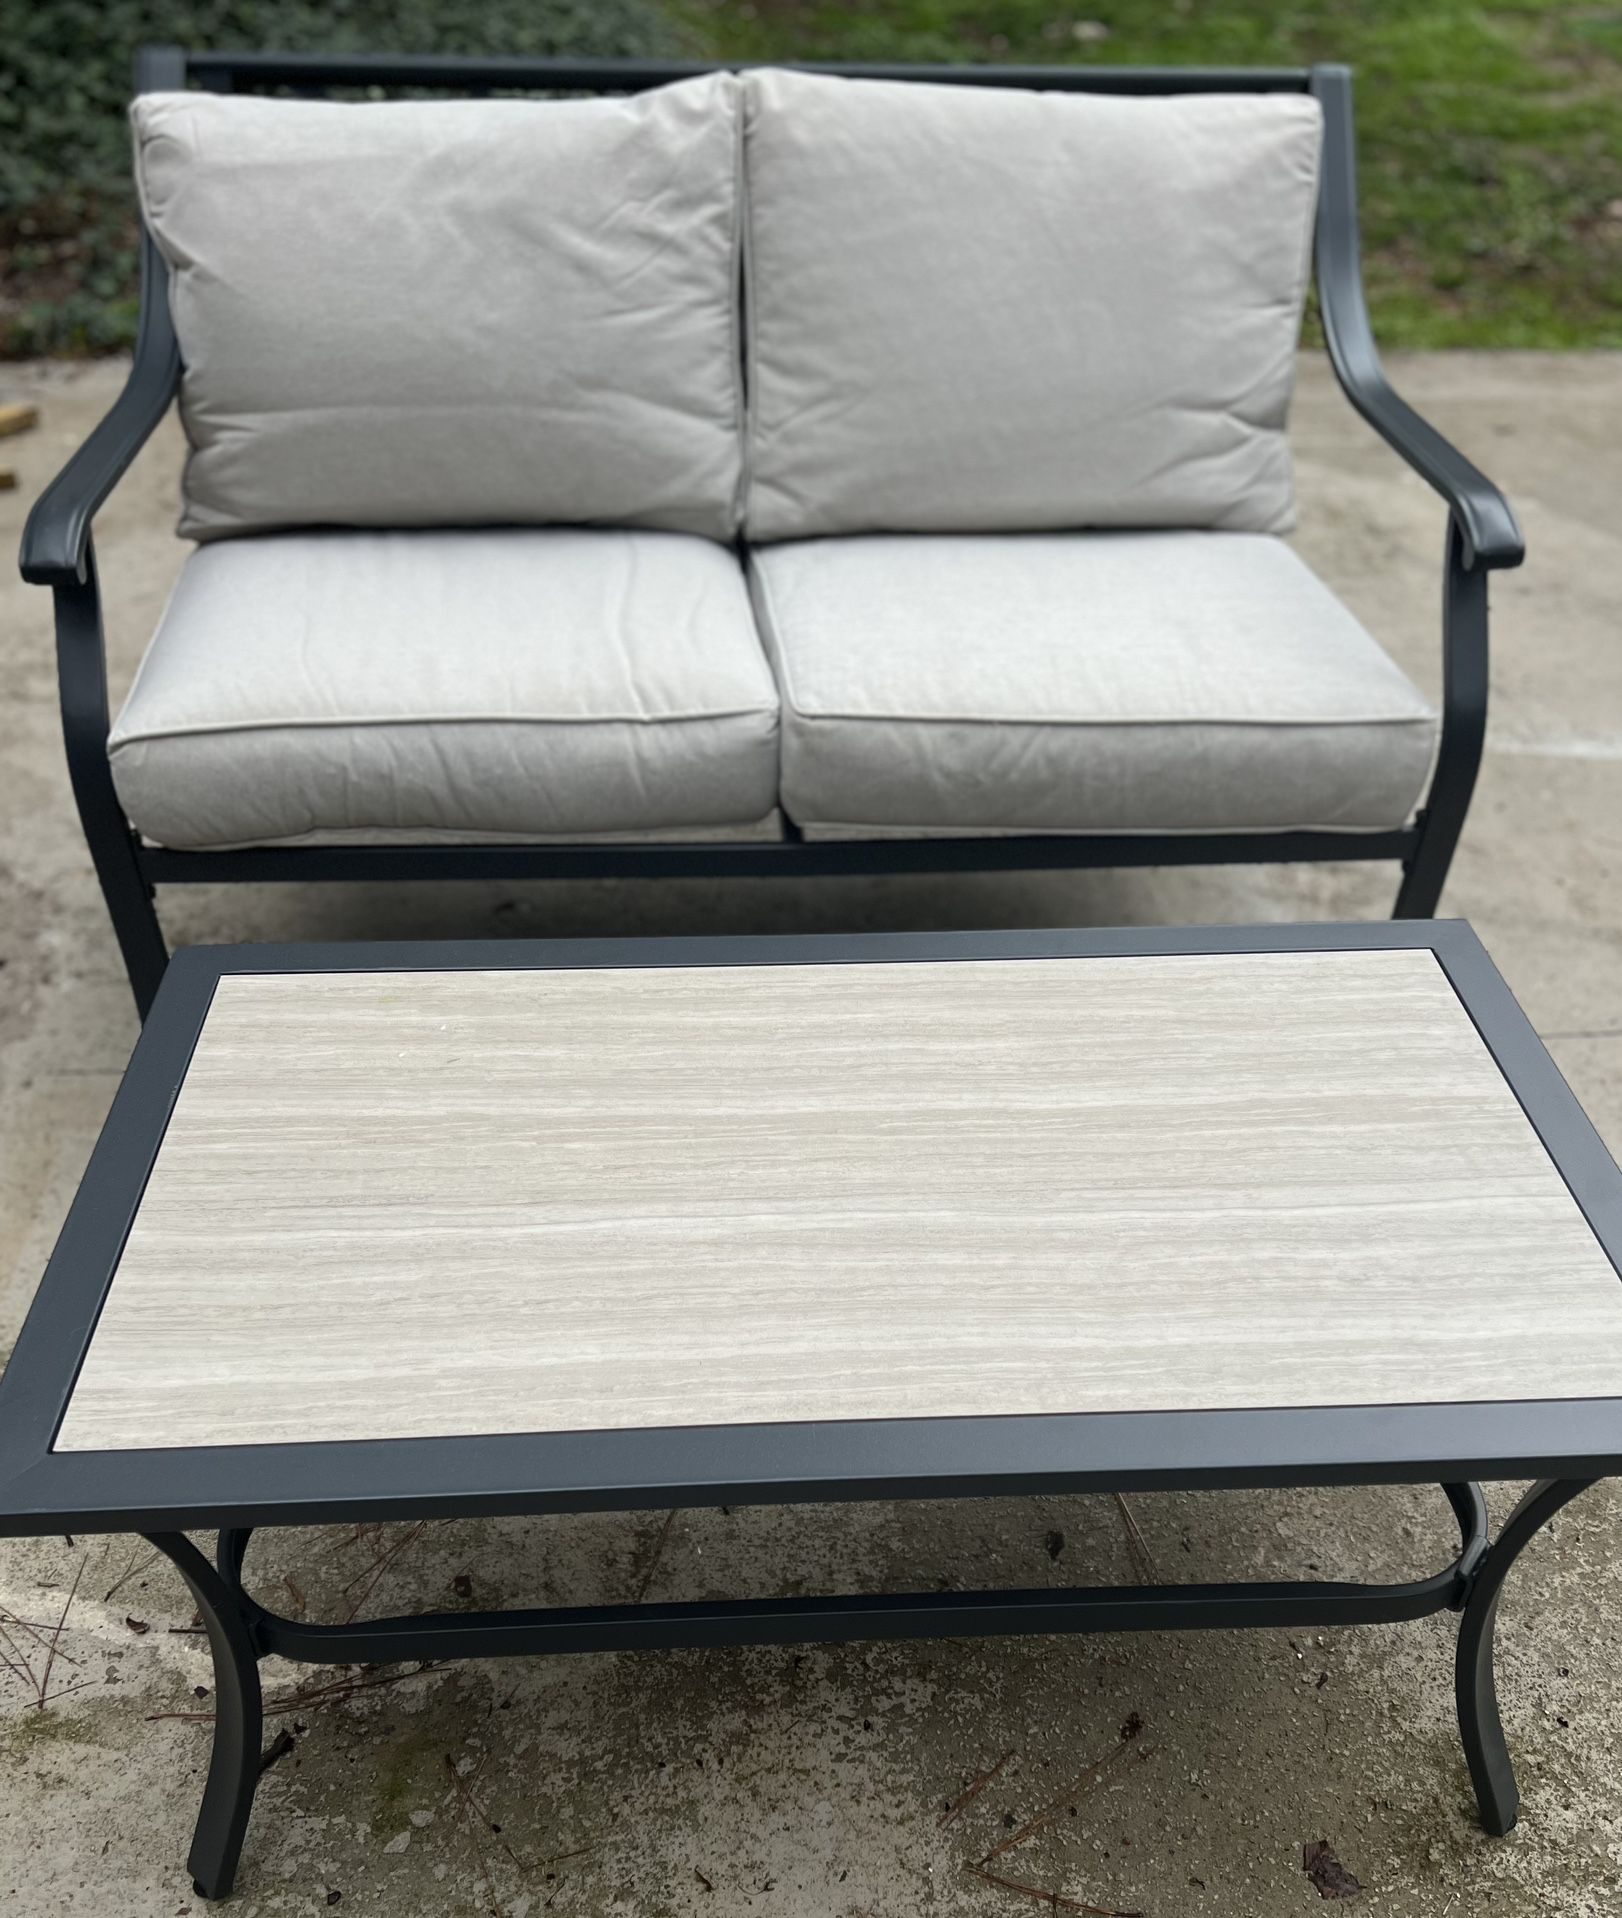 Brand New!! Patio Furniture $160- Never Used!! Set REDUCED TO SELL!!